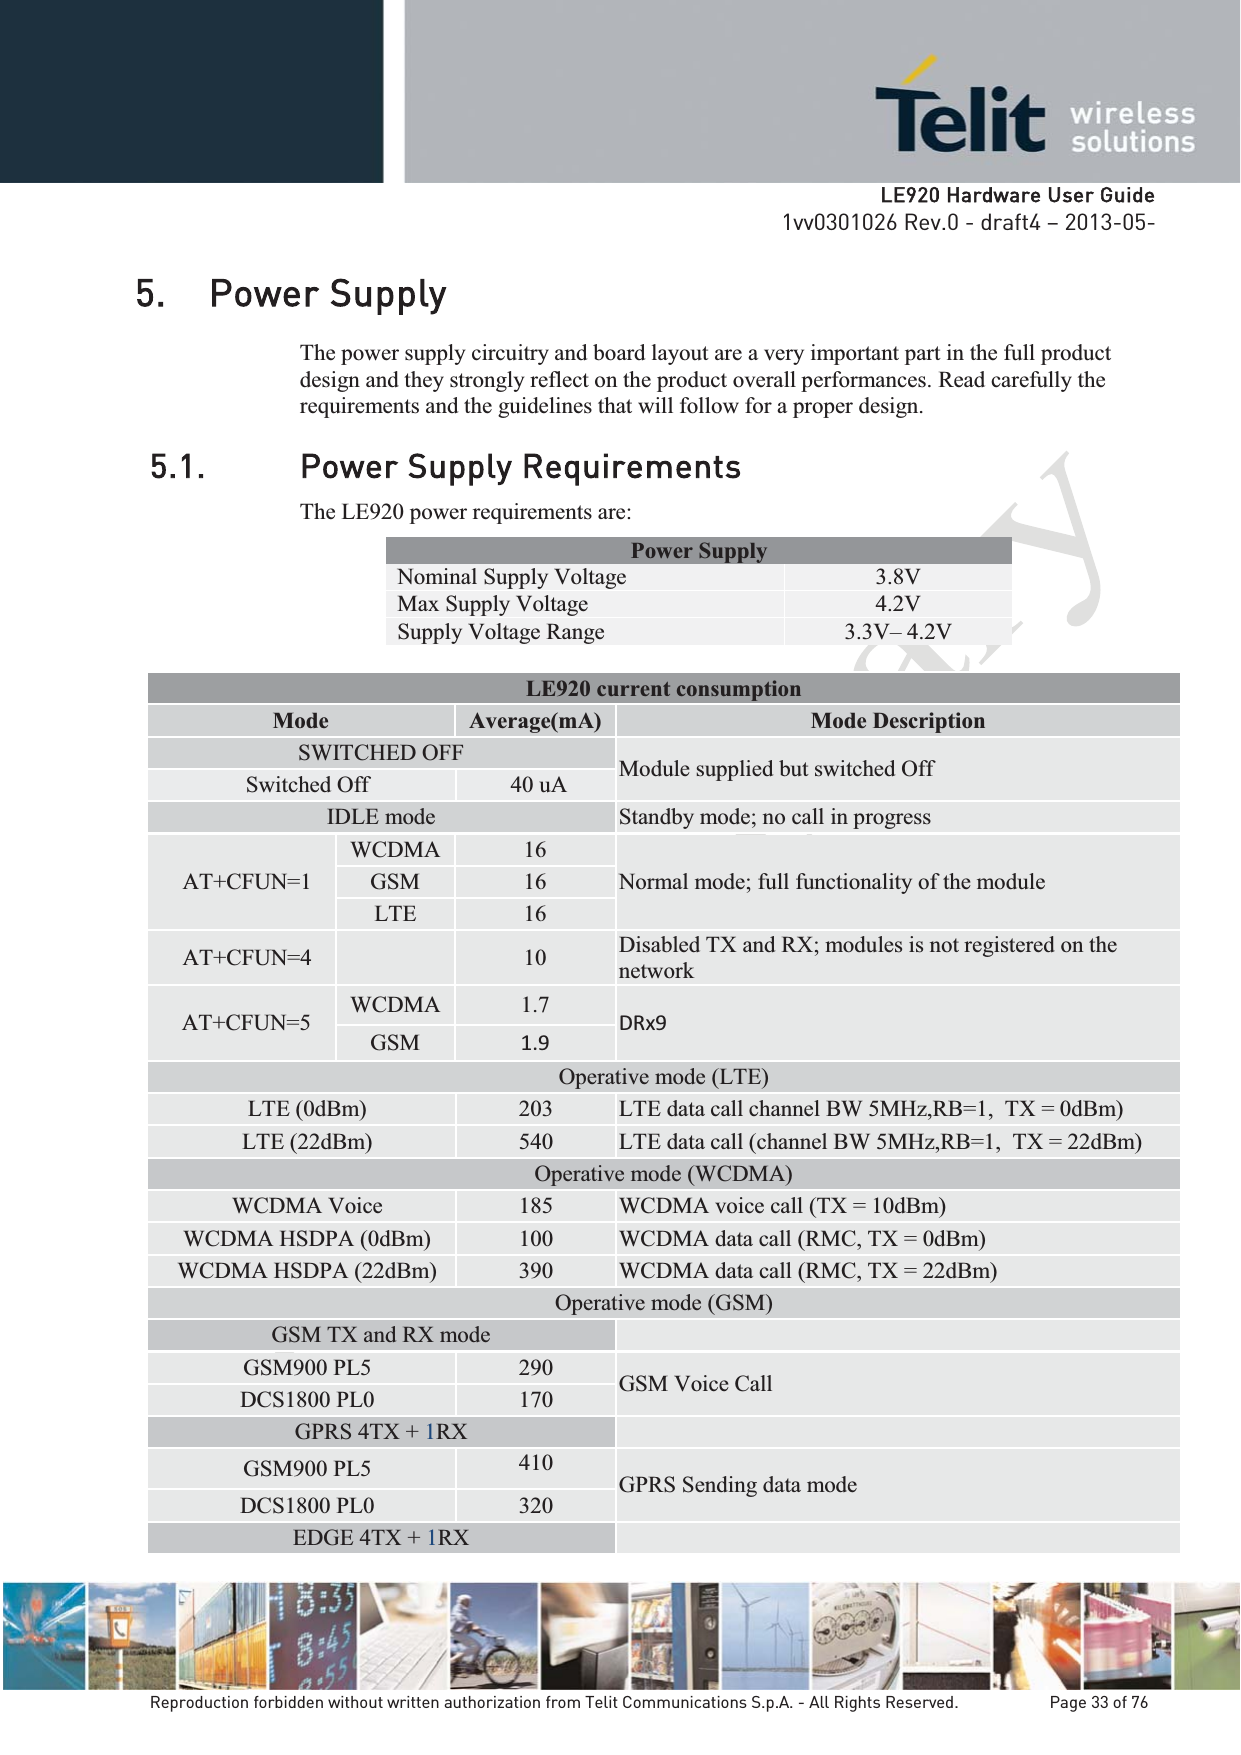   LLE920 Hardware User Guide1vv0301026 Rev.0 - draft4 – 2013-05-Reproduction forbidden without written authorization from Telit Communications S.p.A. - All Rights Reserved.    Page 33 of 76 5. Power Supply  The power supply circuitry and board layout are a very important part in the full product design and they strongly reflect on the product overall performances. Read carefully the requirements and the guidelines that will follow for a proper design. 5.1. Power Supply Requirements The LE920 power requirements are:Power Supply Nominal Supply Voltage  3.8V Max Supply Voltage  4.2V Supply Voltage Range  3.3V– 4.2V LE920 current consumption Mode Average(mA) Mode Description SWITCHED OFF Module supplied but switched Off Switched Off  40 uA IDLE mode Standby mode; no call in progress AT+CFUN=1 WCDMA 16 Normal mode; full functionality of the module GSM 16 LTE 16 AT+CFUN=4  10 Disabled TX and RX; modules is not registered on the network AT+CFUN=5 WCDMA 1.7 DRx9 GSM 1.9Operative mode (LTE) LTE (0dBm) 203 LTE data call channel BW 5MHz,RB=1,  TX = 0dBm) LTE (22dBm) 540 LTE data call (channel BW 5MHz,RB=1,  TX = 22dBm) Operative mode (WCDMA)WCDMA Voice 185 WCDMA voice call (TX = 10dBm) WCDMA HSDPA (0dBm) 100 WCDMA data call (RMC, TX = 0dBm) WCDMA HSDPA (22dBm) 390 WCDMA data call (RMC, TX = 22dBm) Operative mode (GSM) GSM TX and RX mode   GSM900 PL5 290 GSM Voice Call DCS1800 PL0 170 GPRS 4TX + 1RX  GSM900 PL5 410 GPRS Sending data mode DCS1800 PL0 320 EDGE 4TX + 1RX   